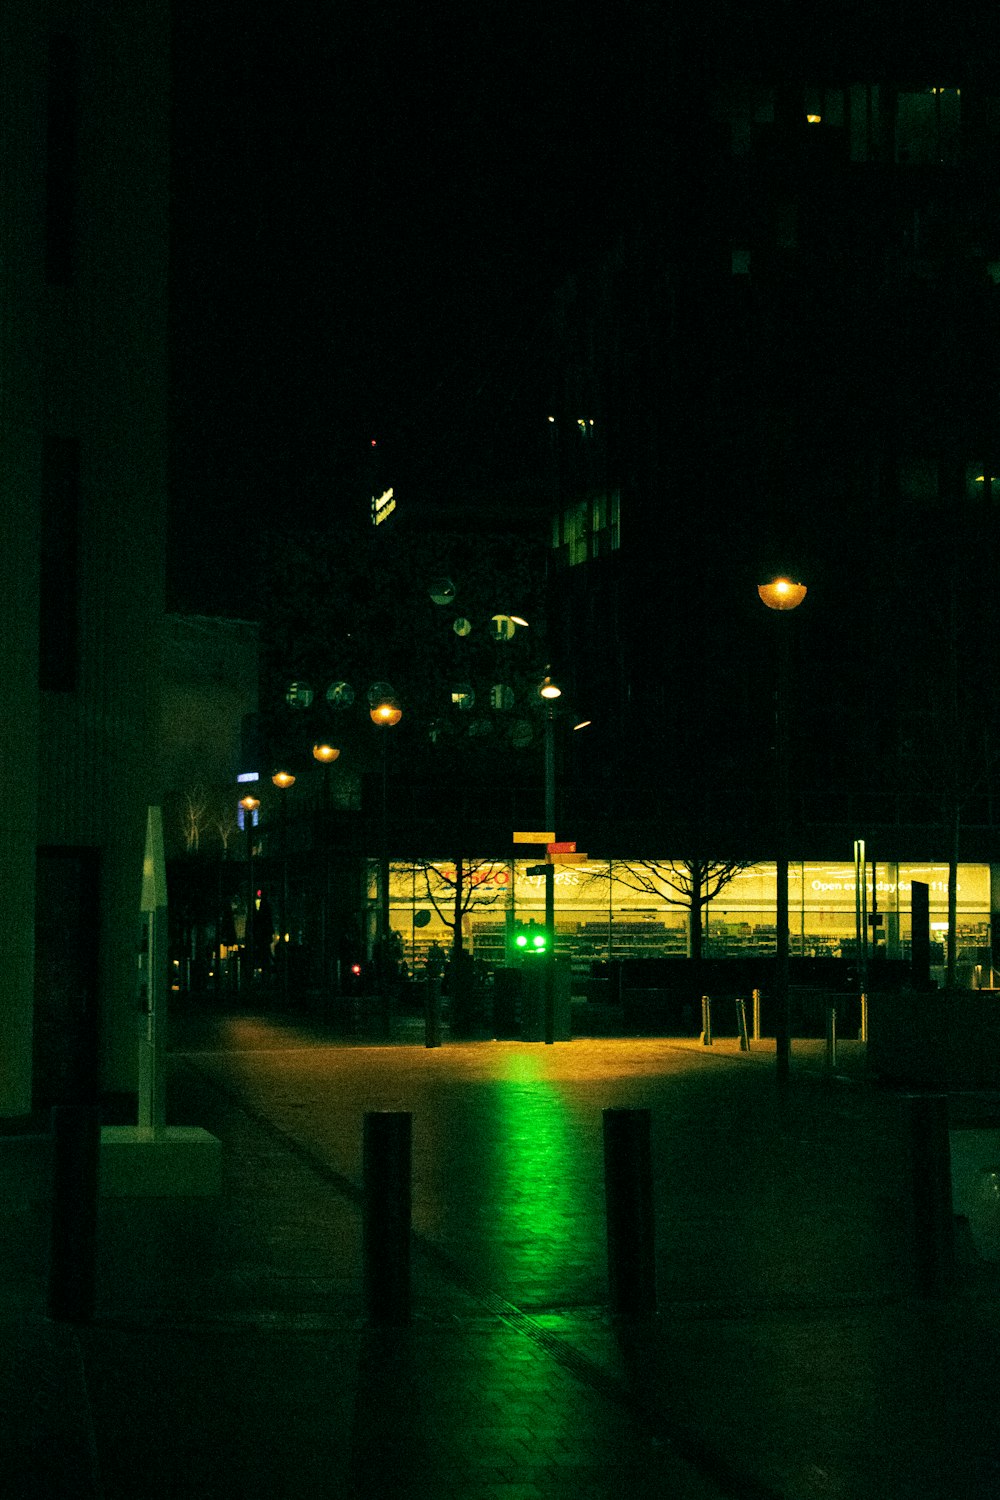 a dark city street at night with a green traffic light